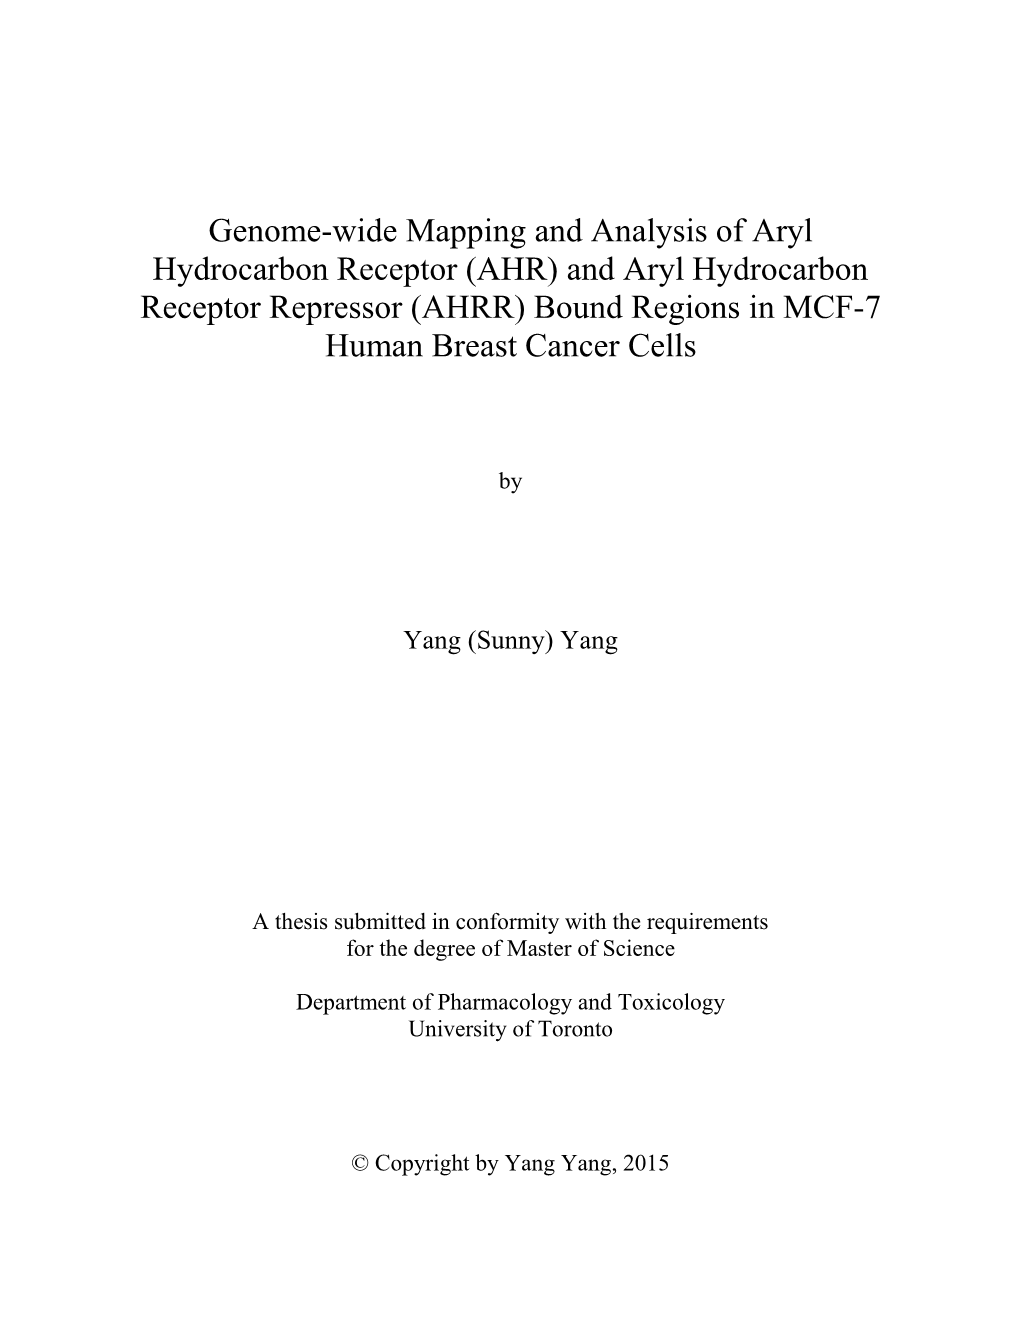 And Aryl Hydrocarbon Receptor Repressor (AHRR) Bound Regions in MCF-7 Human Breast Cancer Cells